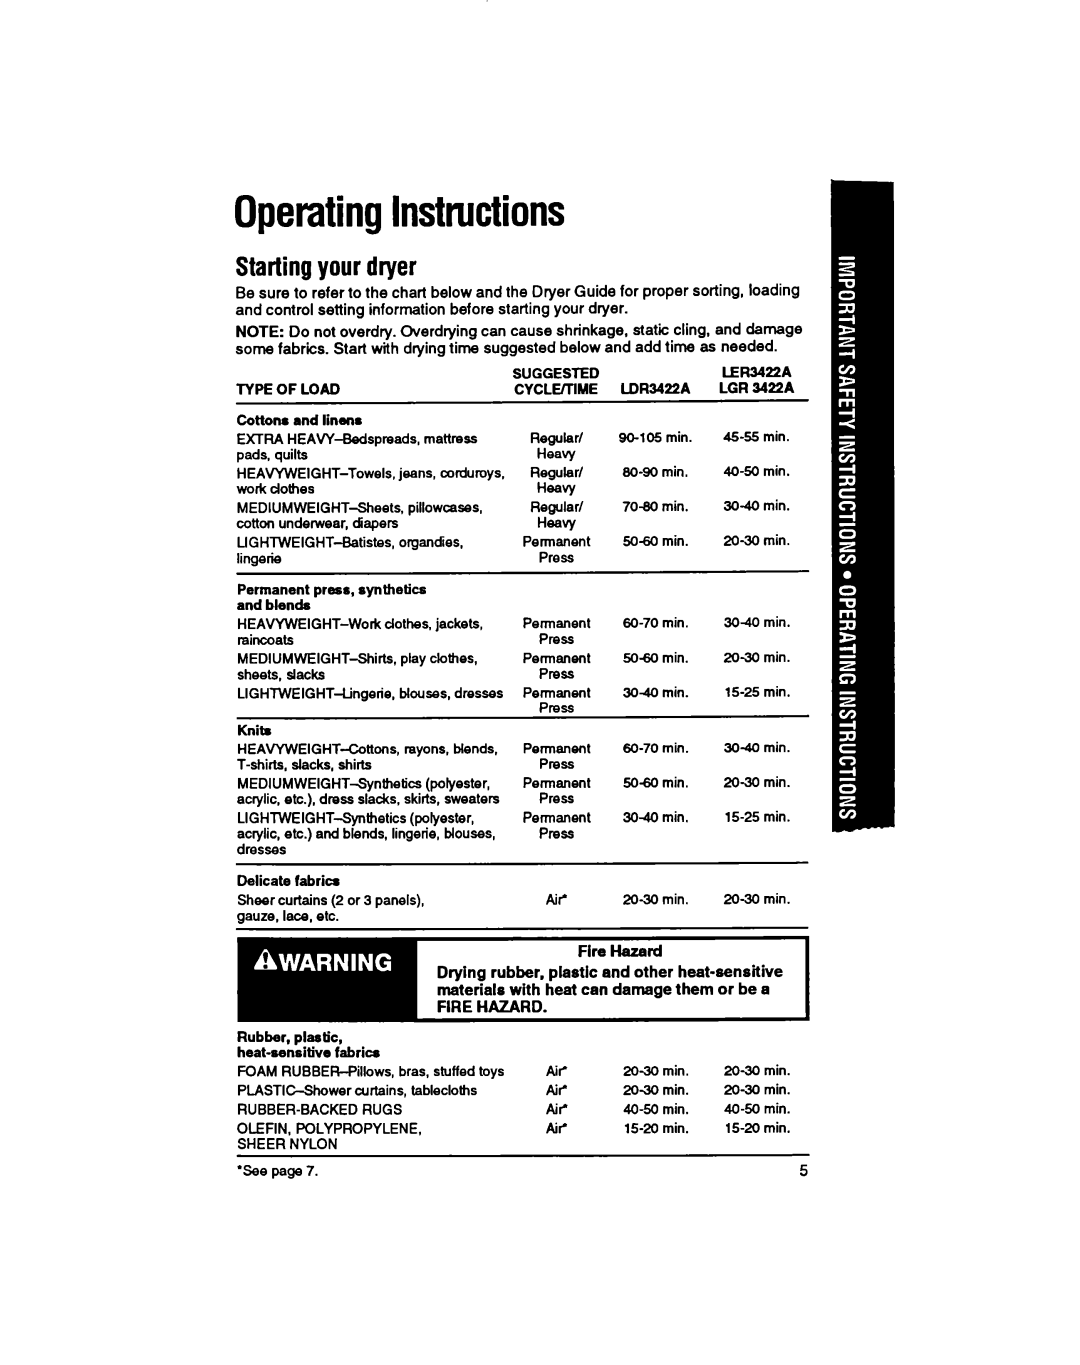 Whirlpool LDR3422A, LGR3422A manual OperatingInstructions, Startingyour dryer 